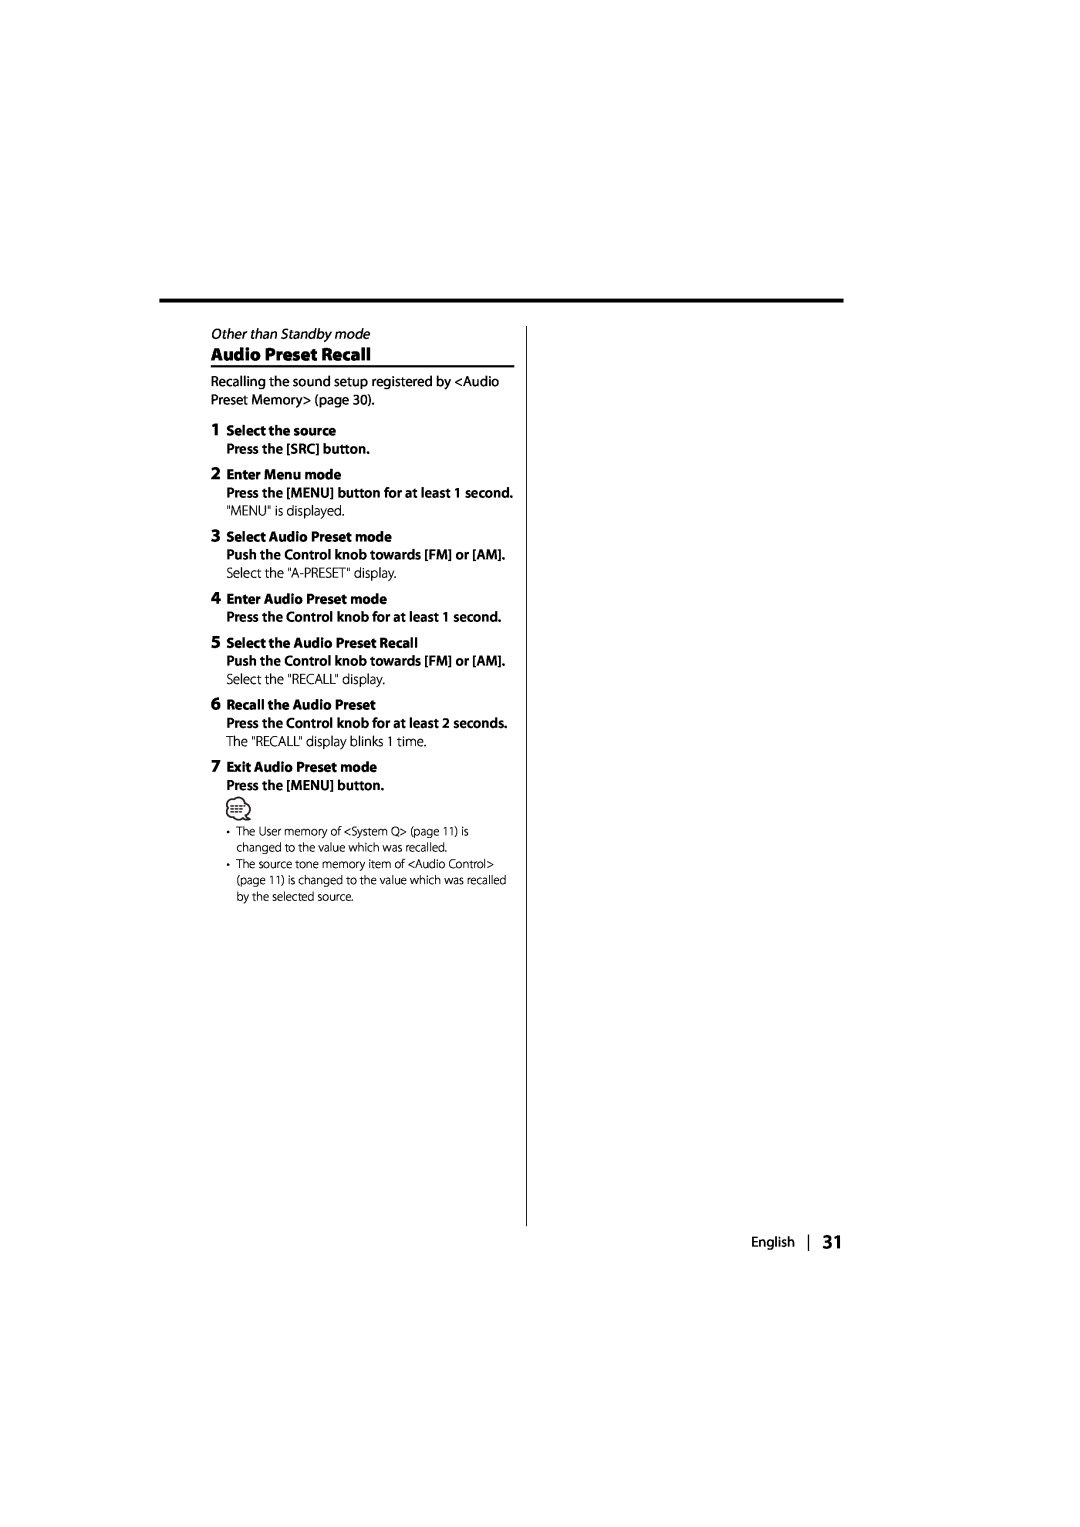 Kenwood DPX-MP2090U instruction manual Audio Preset Recall, Other than Standby mode 